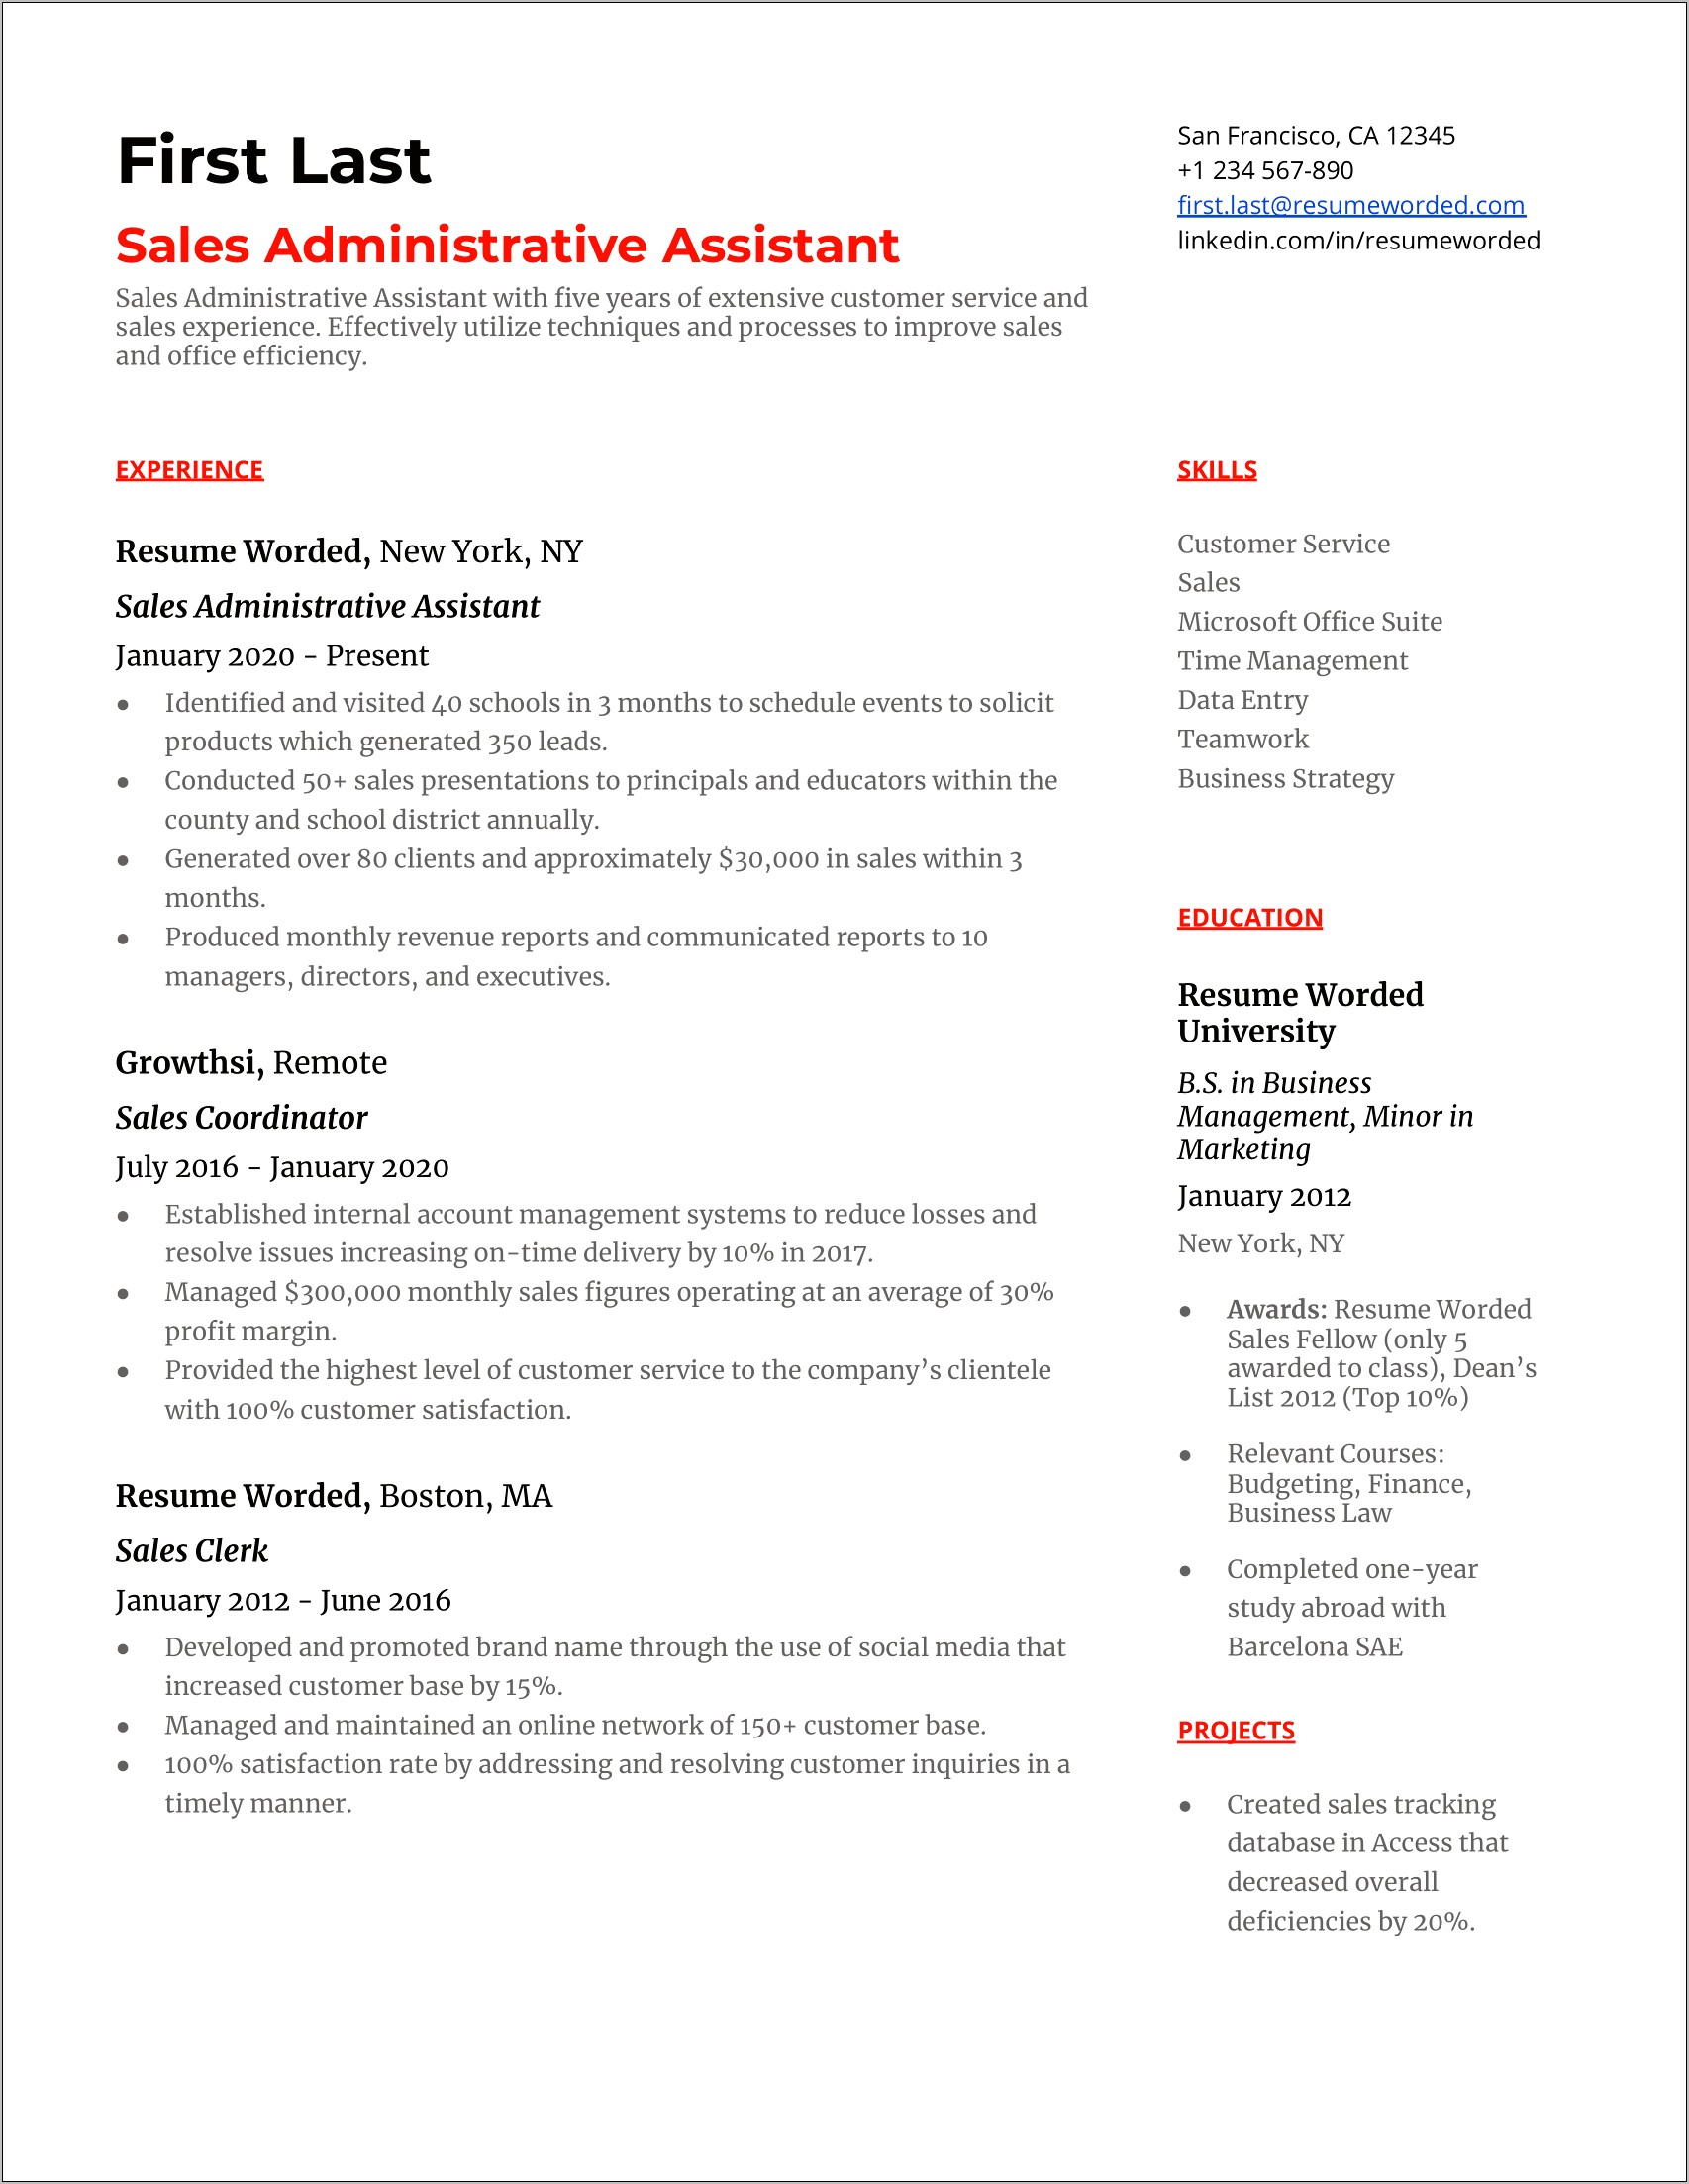 Resume For Assistant Sales Manager